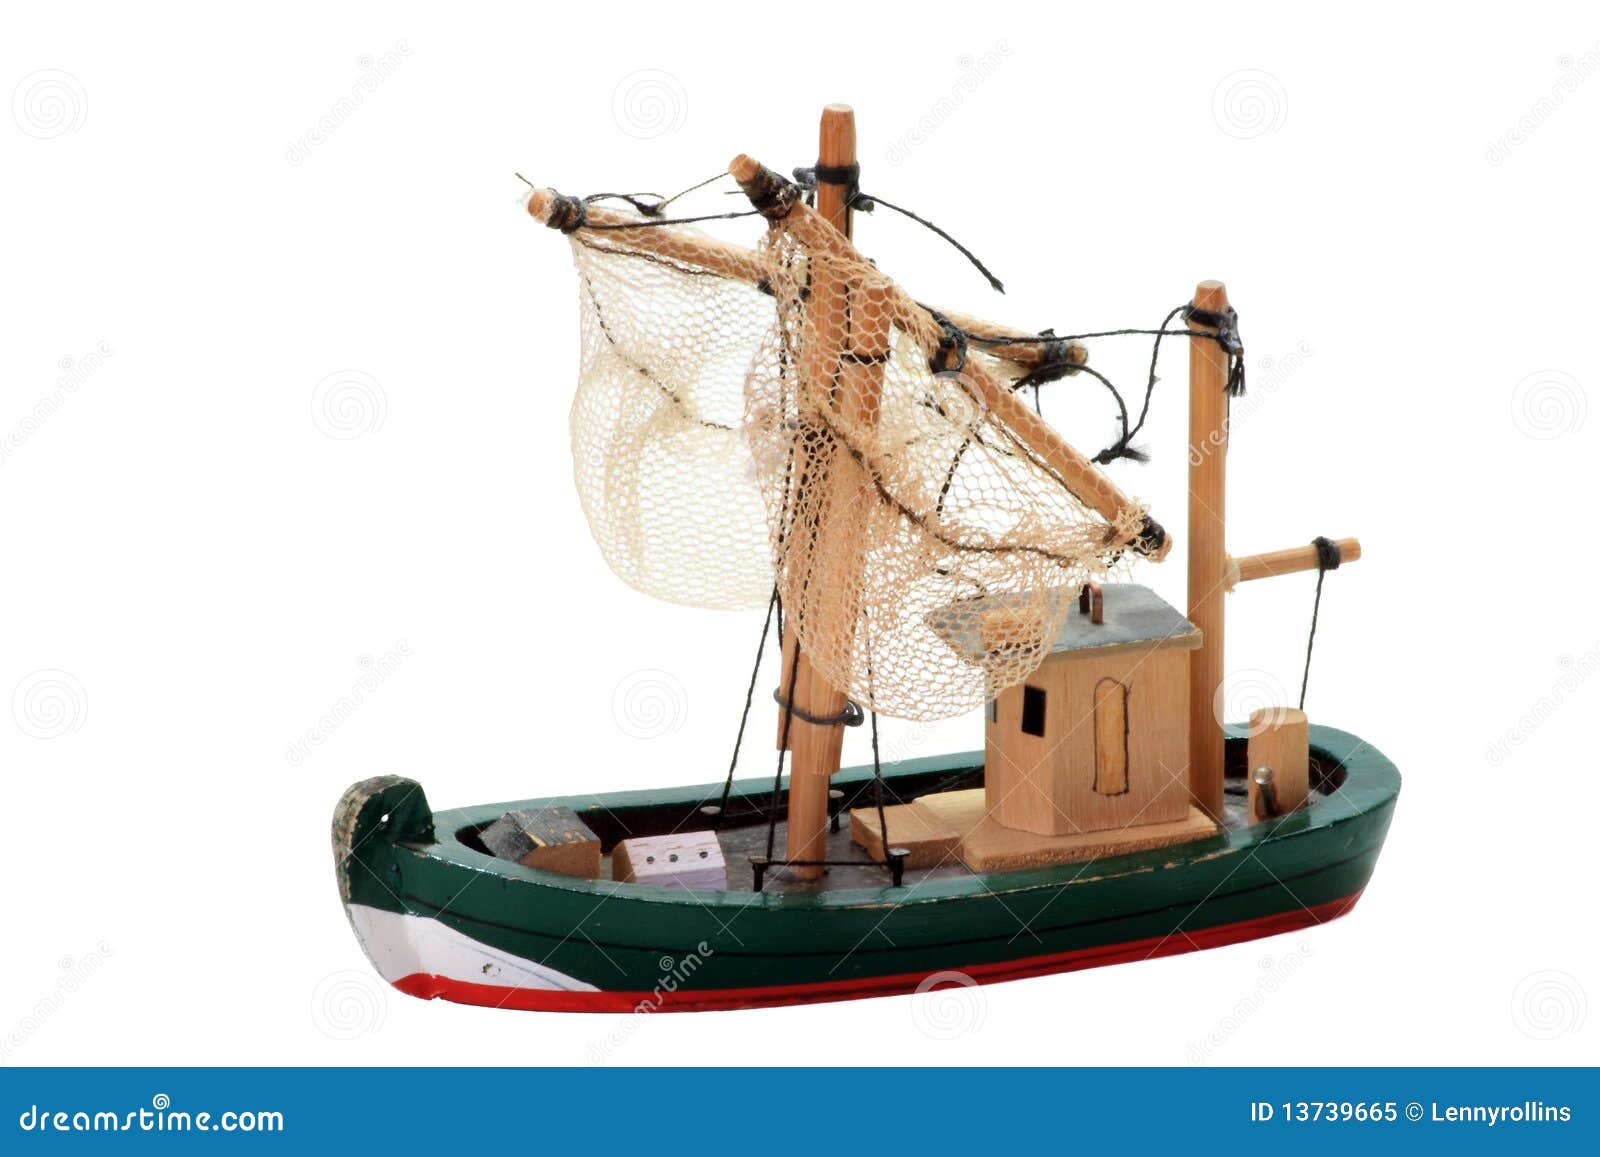 Toy Fishing Boats